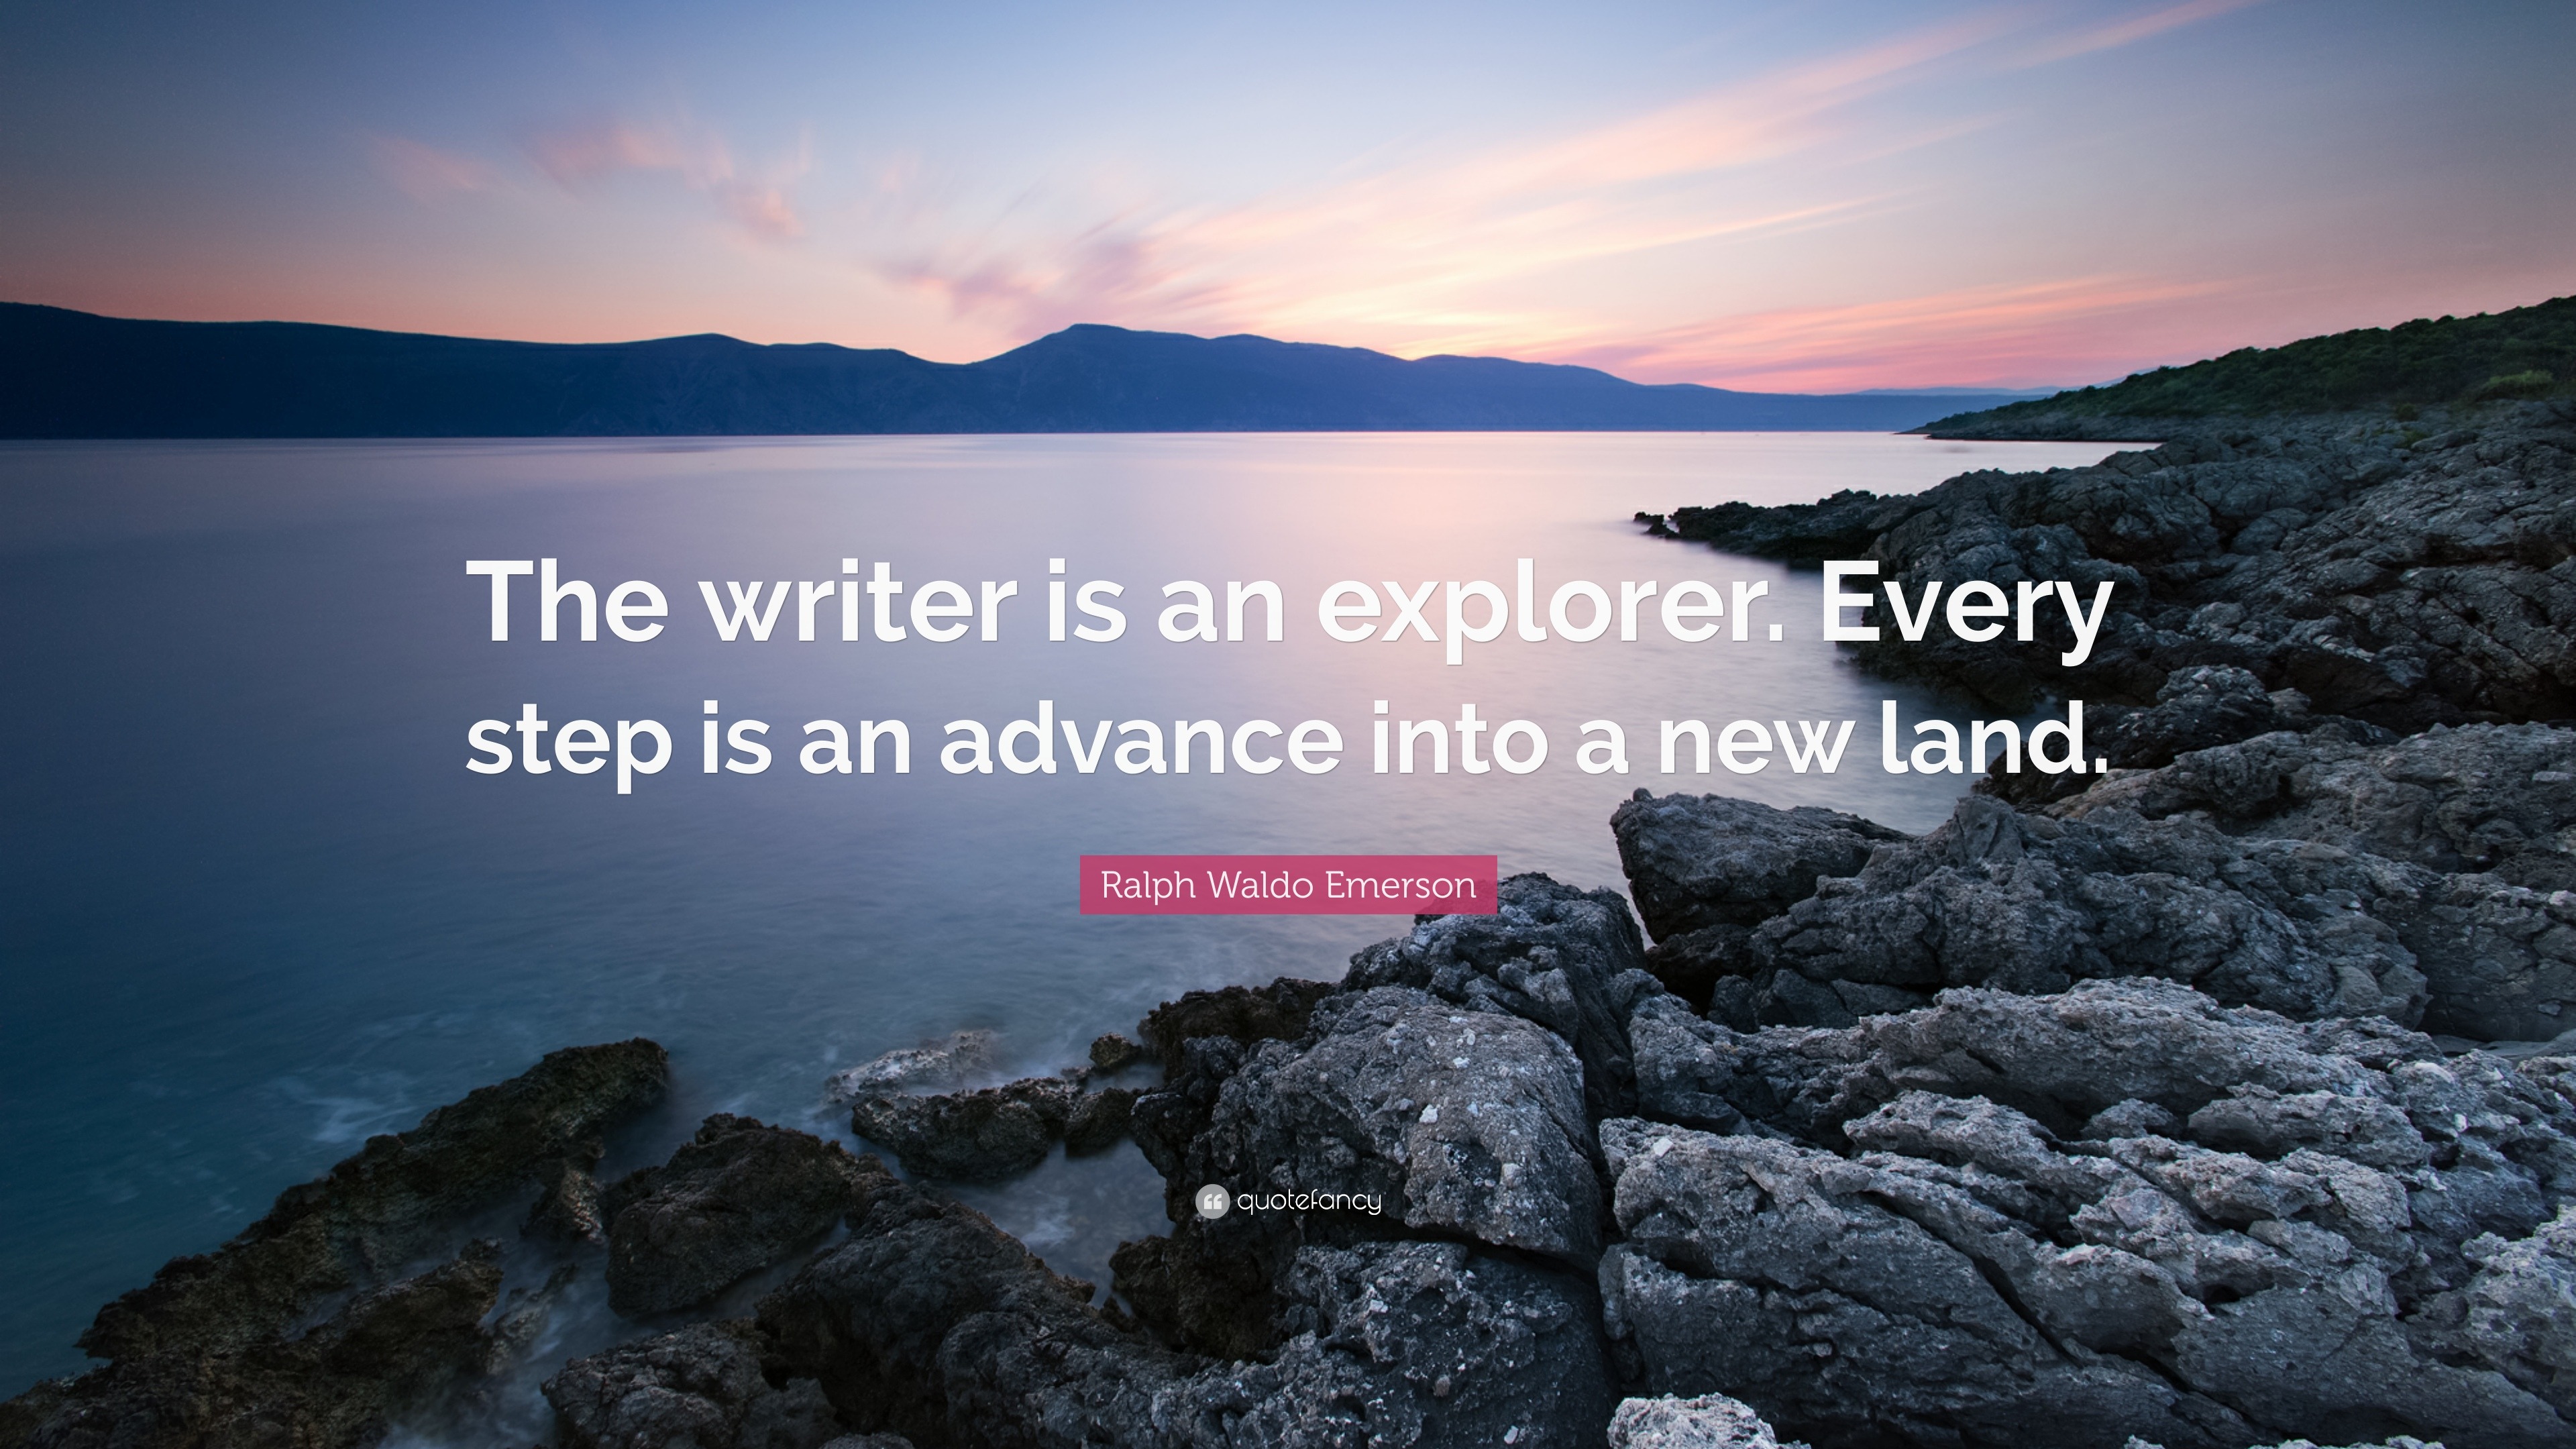 Ralph Waldo Emerson Quote: The writer is an explorer Every step is an